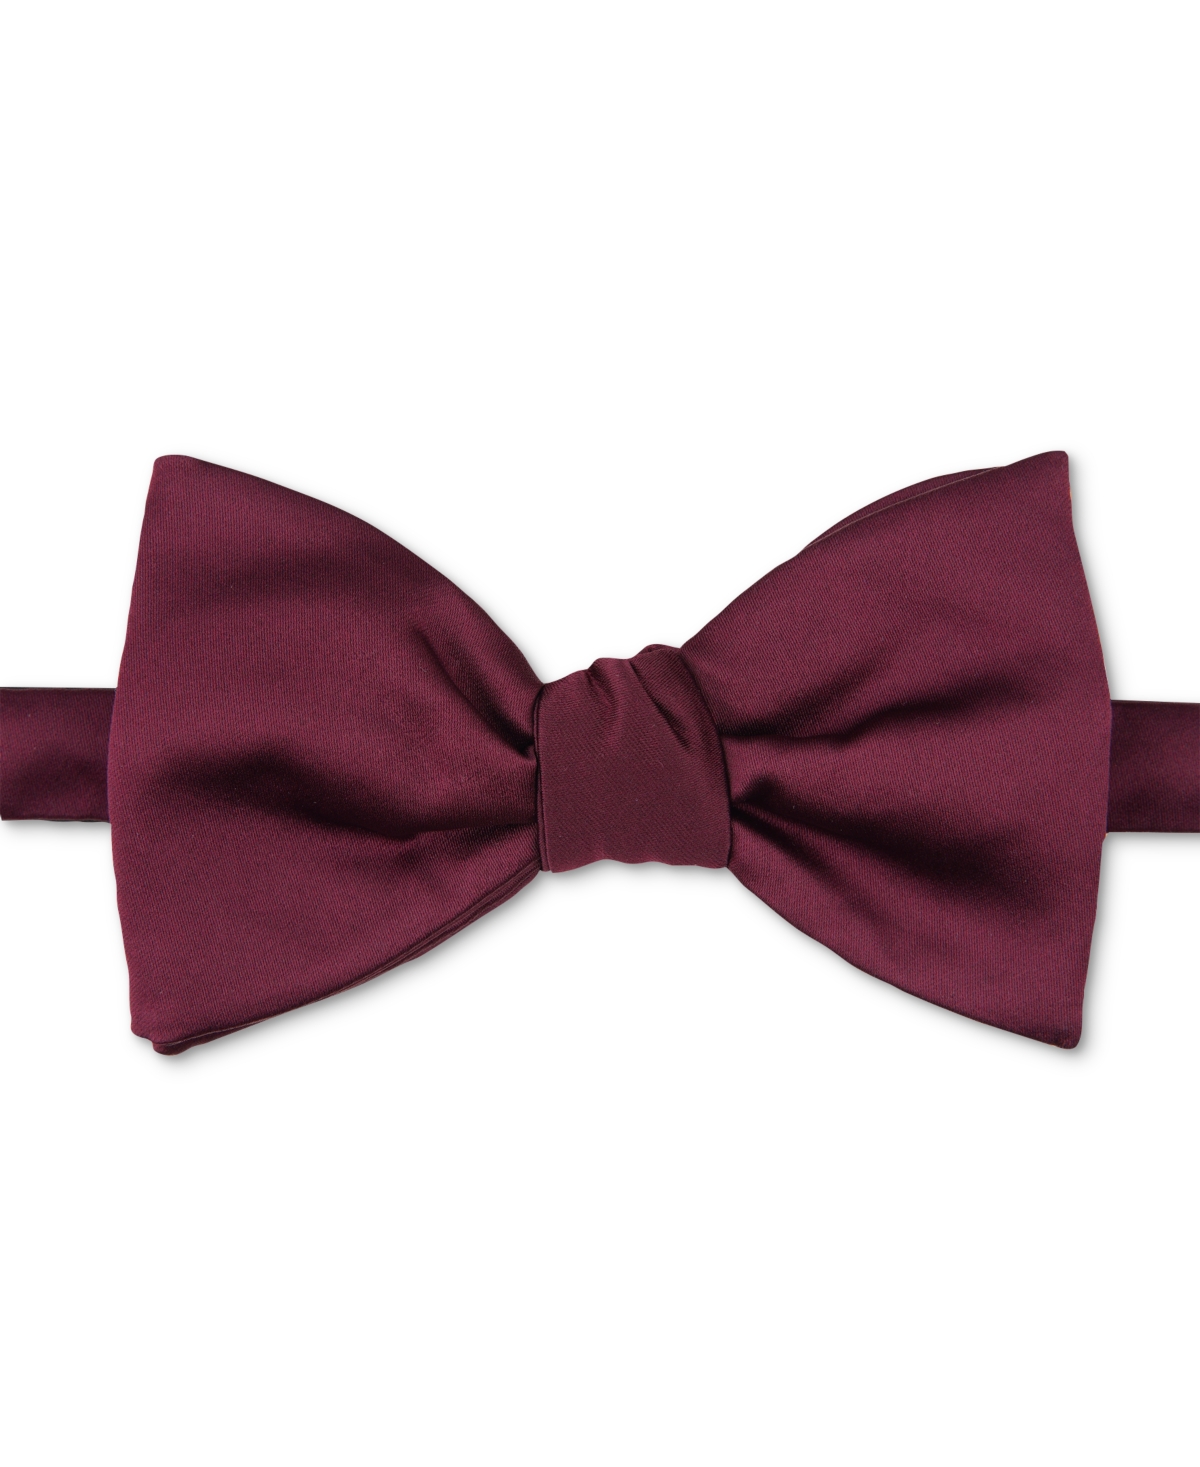 Men's Oversized Satin Solid Bow Tie, Created for Macy's - Burgundy